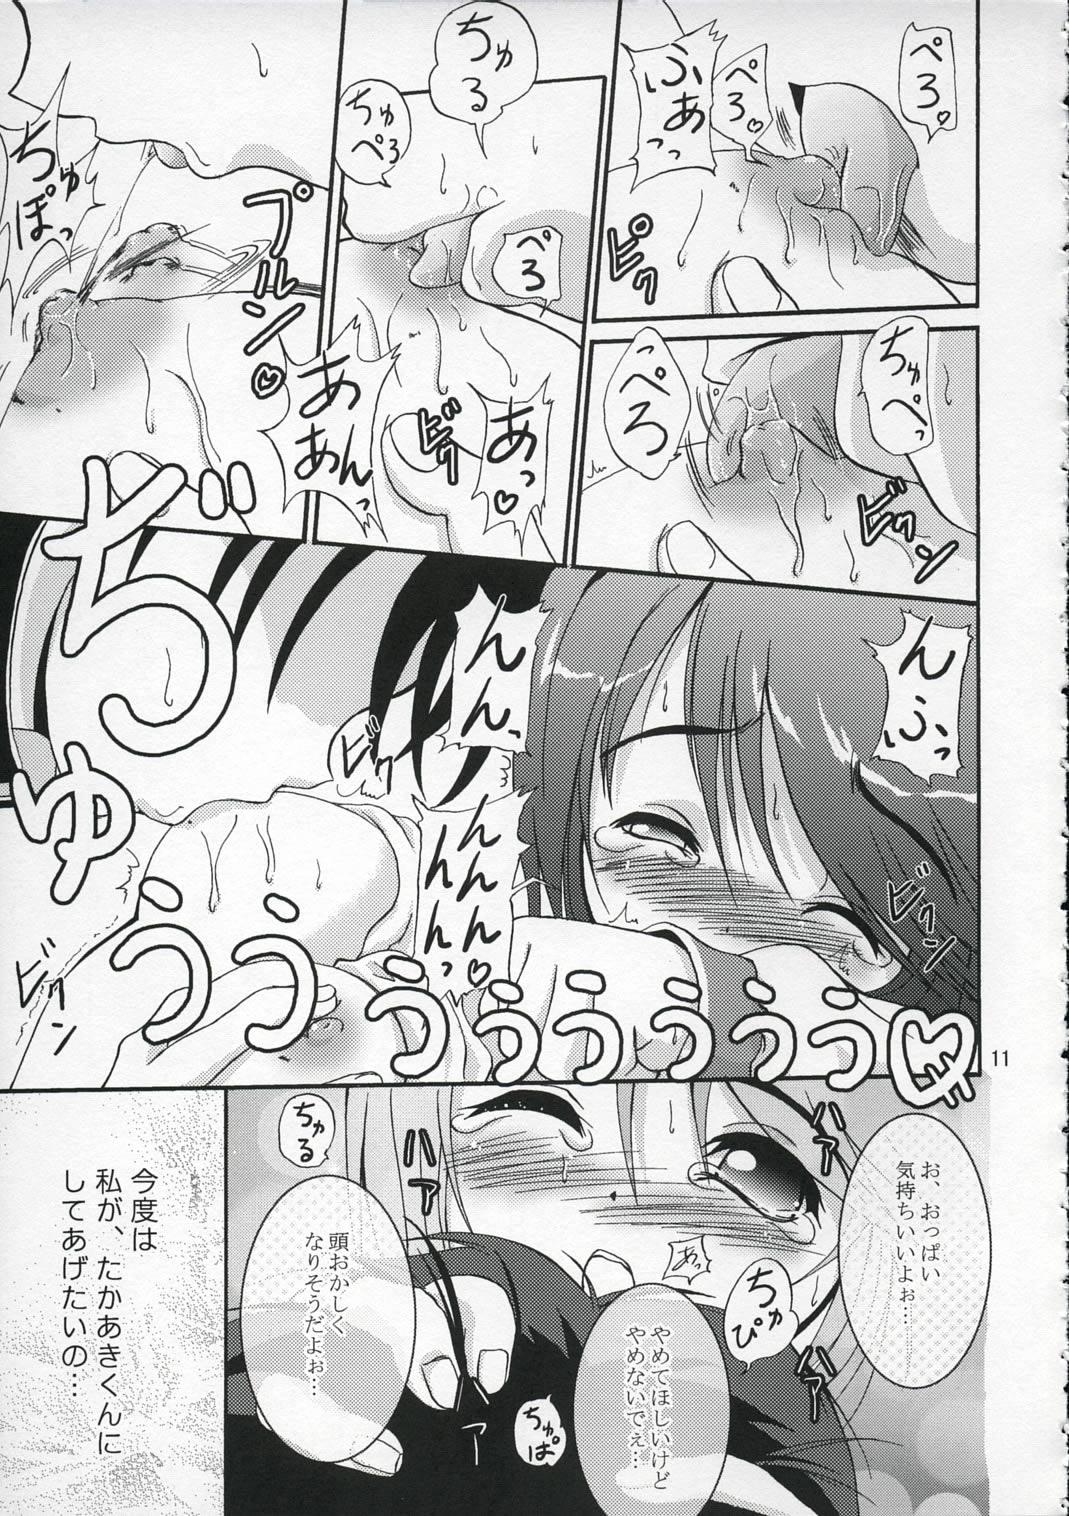 Hot Blow Jobs DoHearts 1 Onegai Iincho - Toheart2 Close Up - Page 10